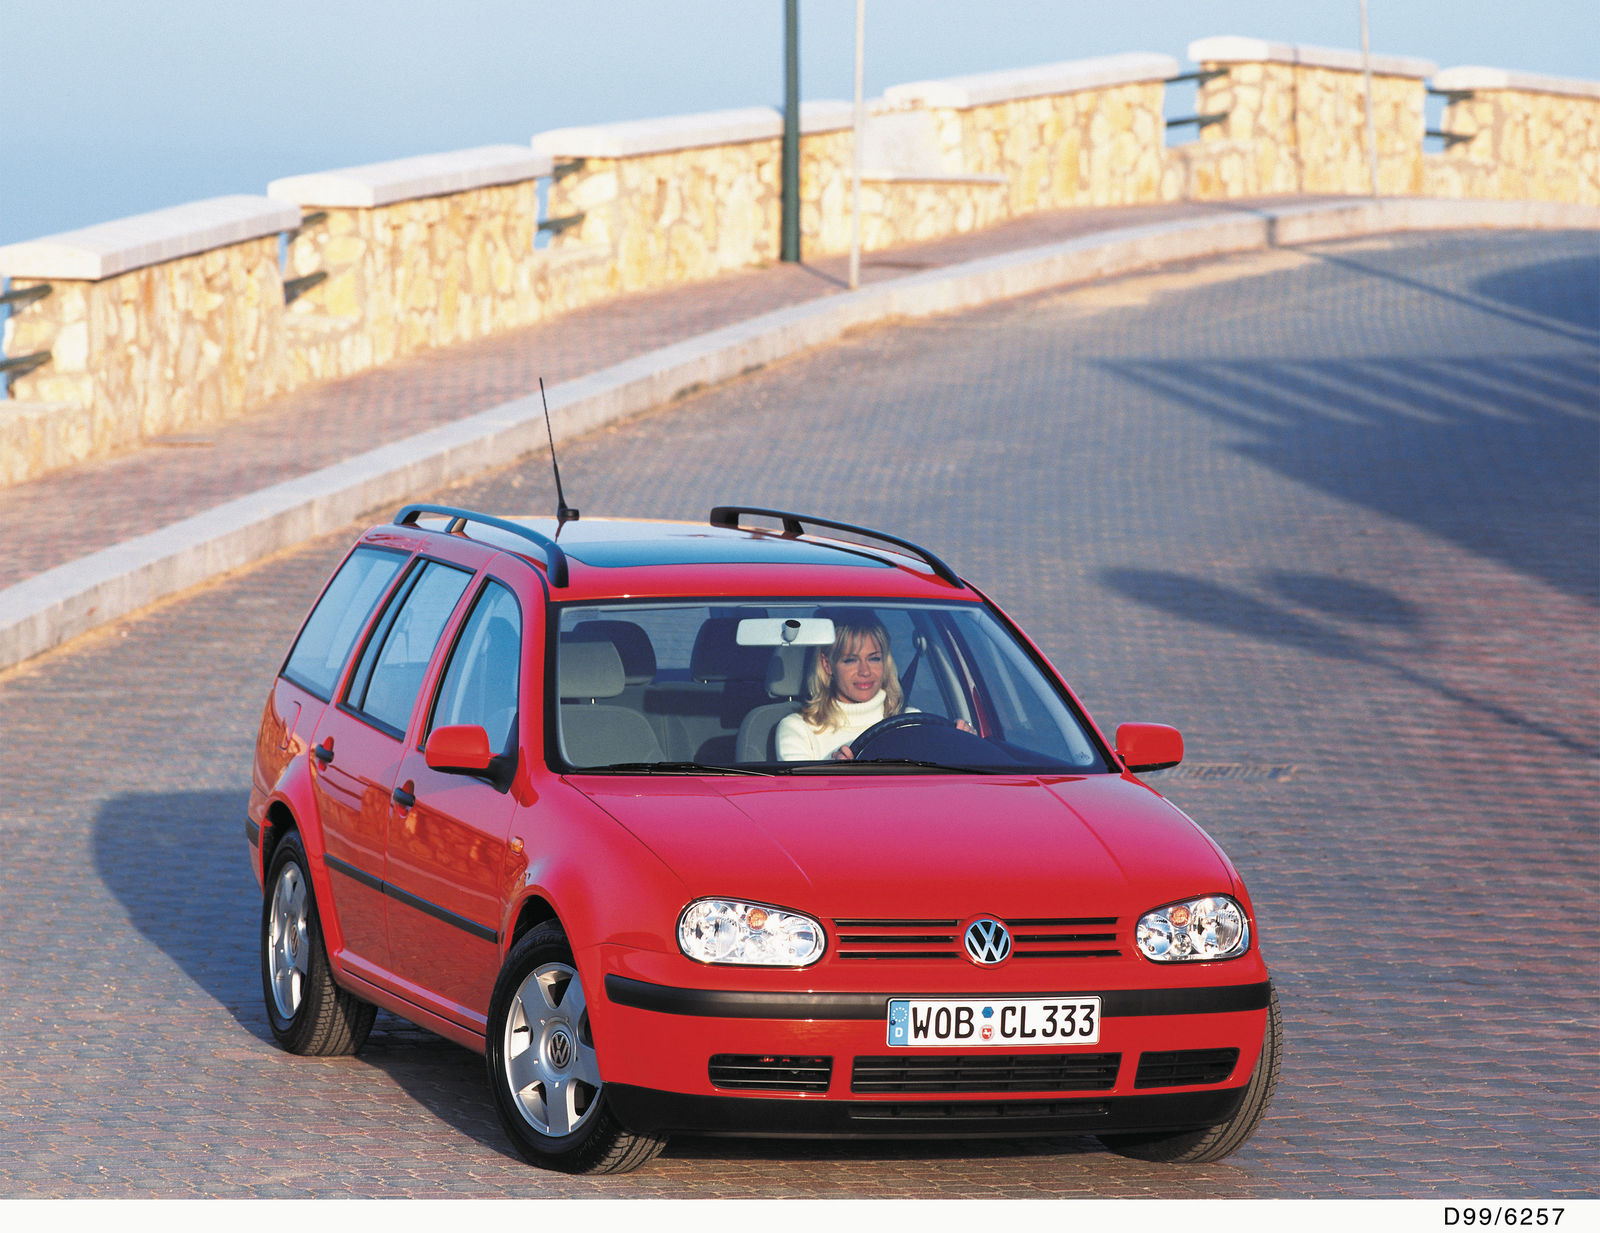 Product: Golf Variant (1999)